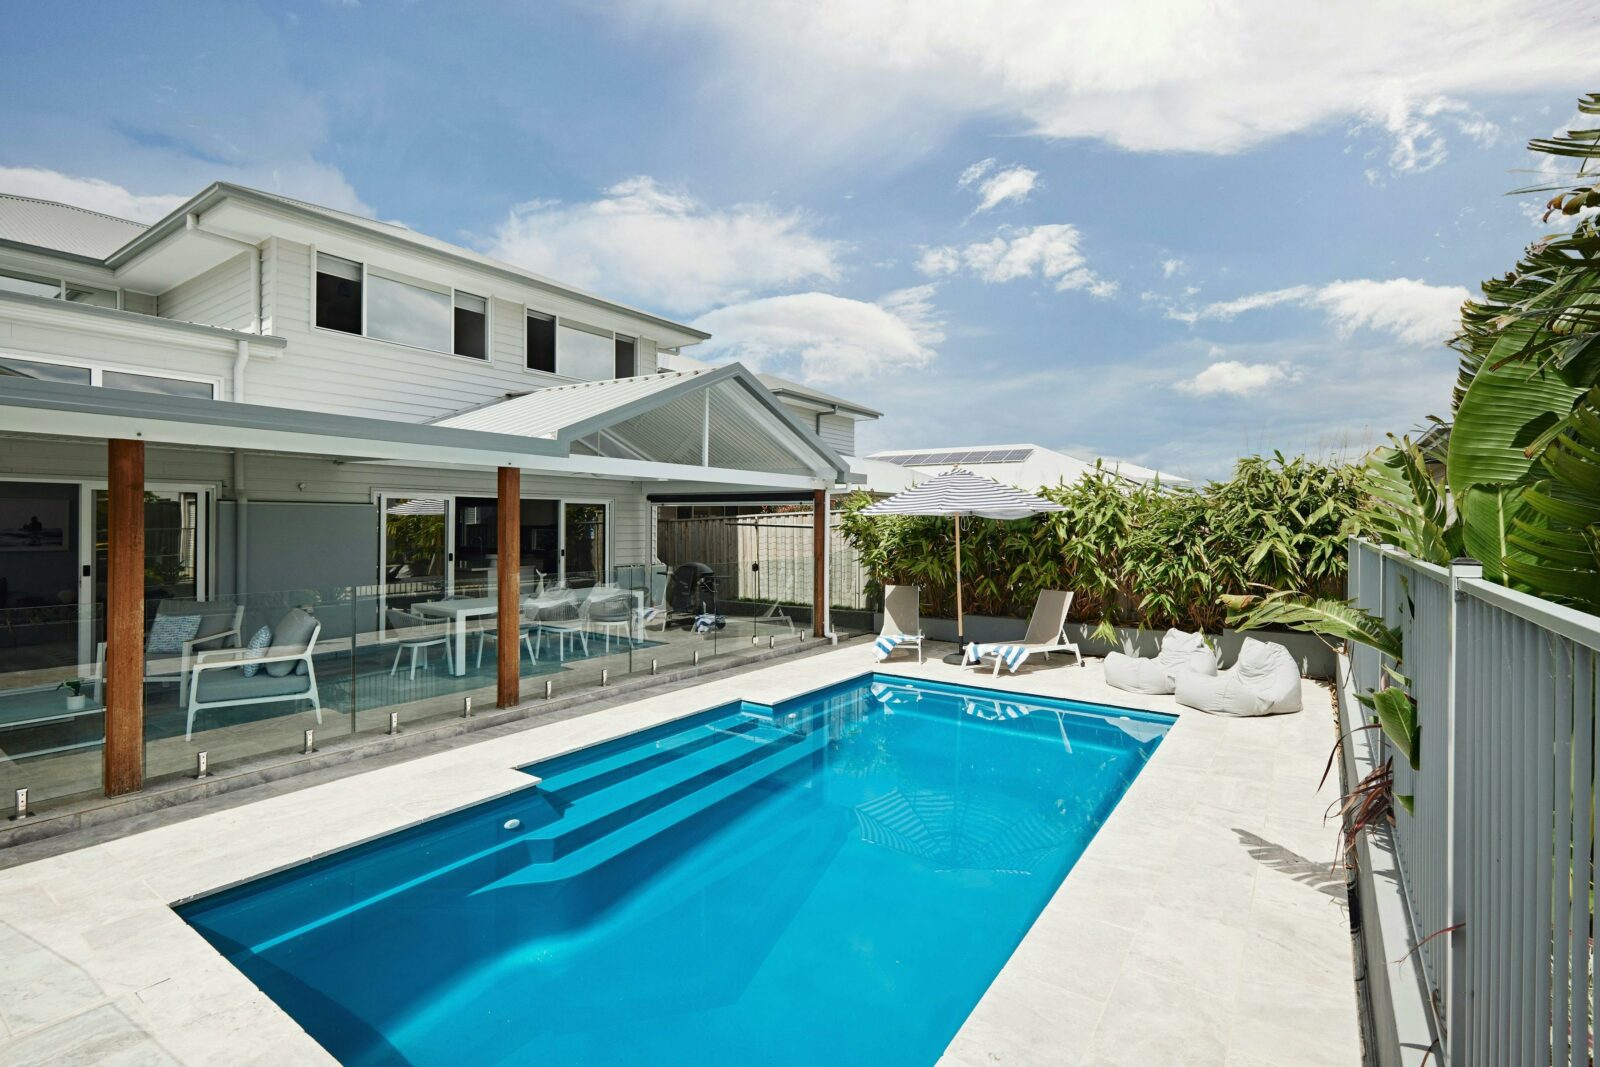 Front of the house with the swimming pool